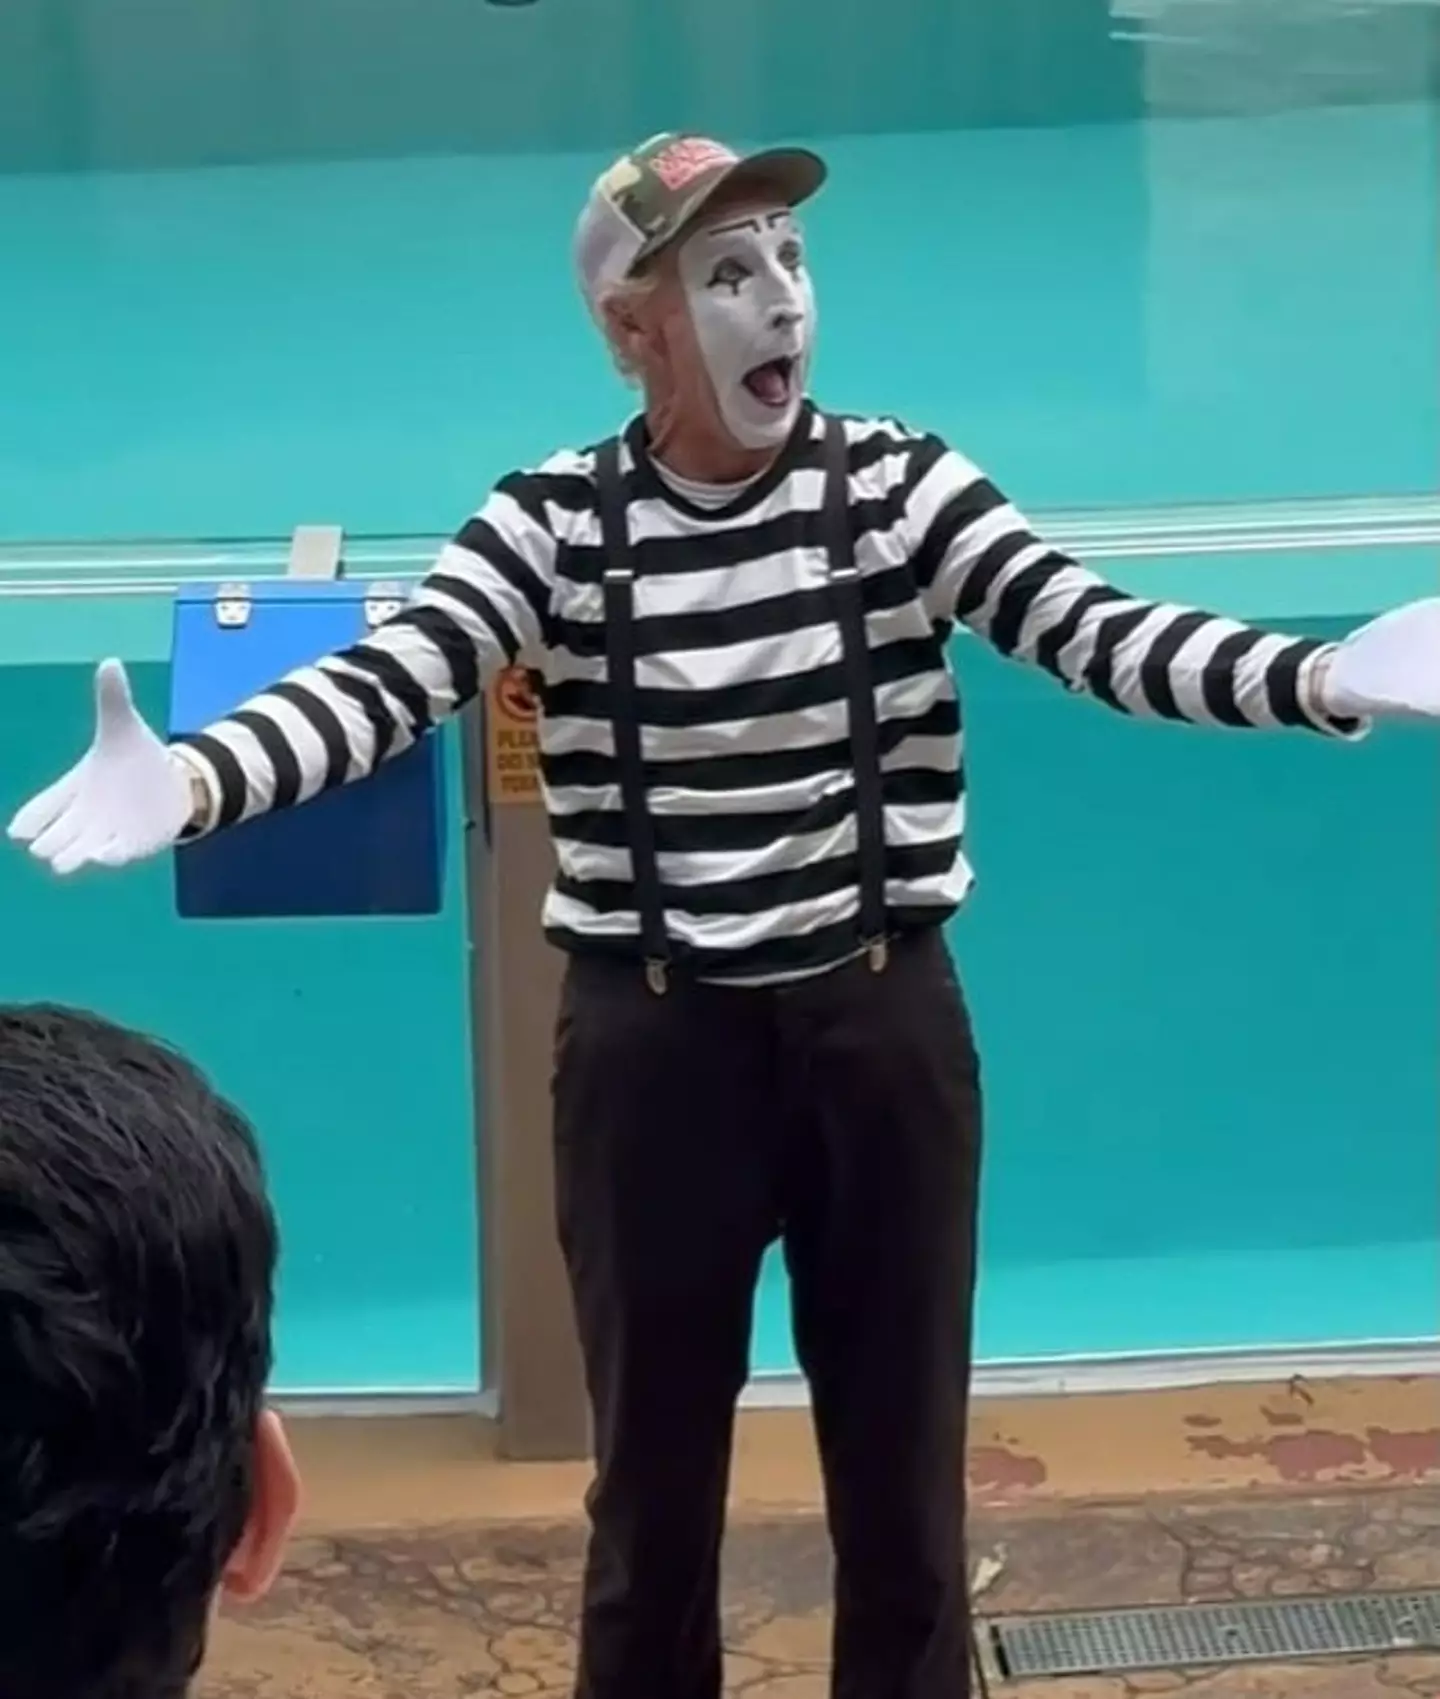 Lynn claimed he was not given the chance to tell his side of the story. (TikTok / lynnthemime)